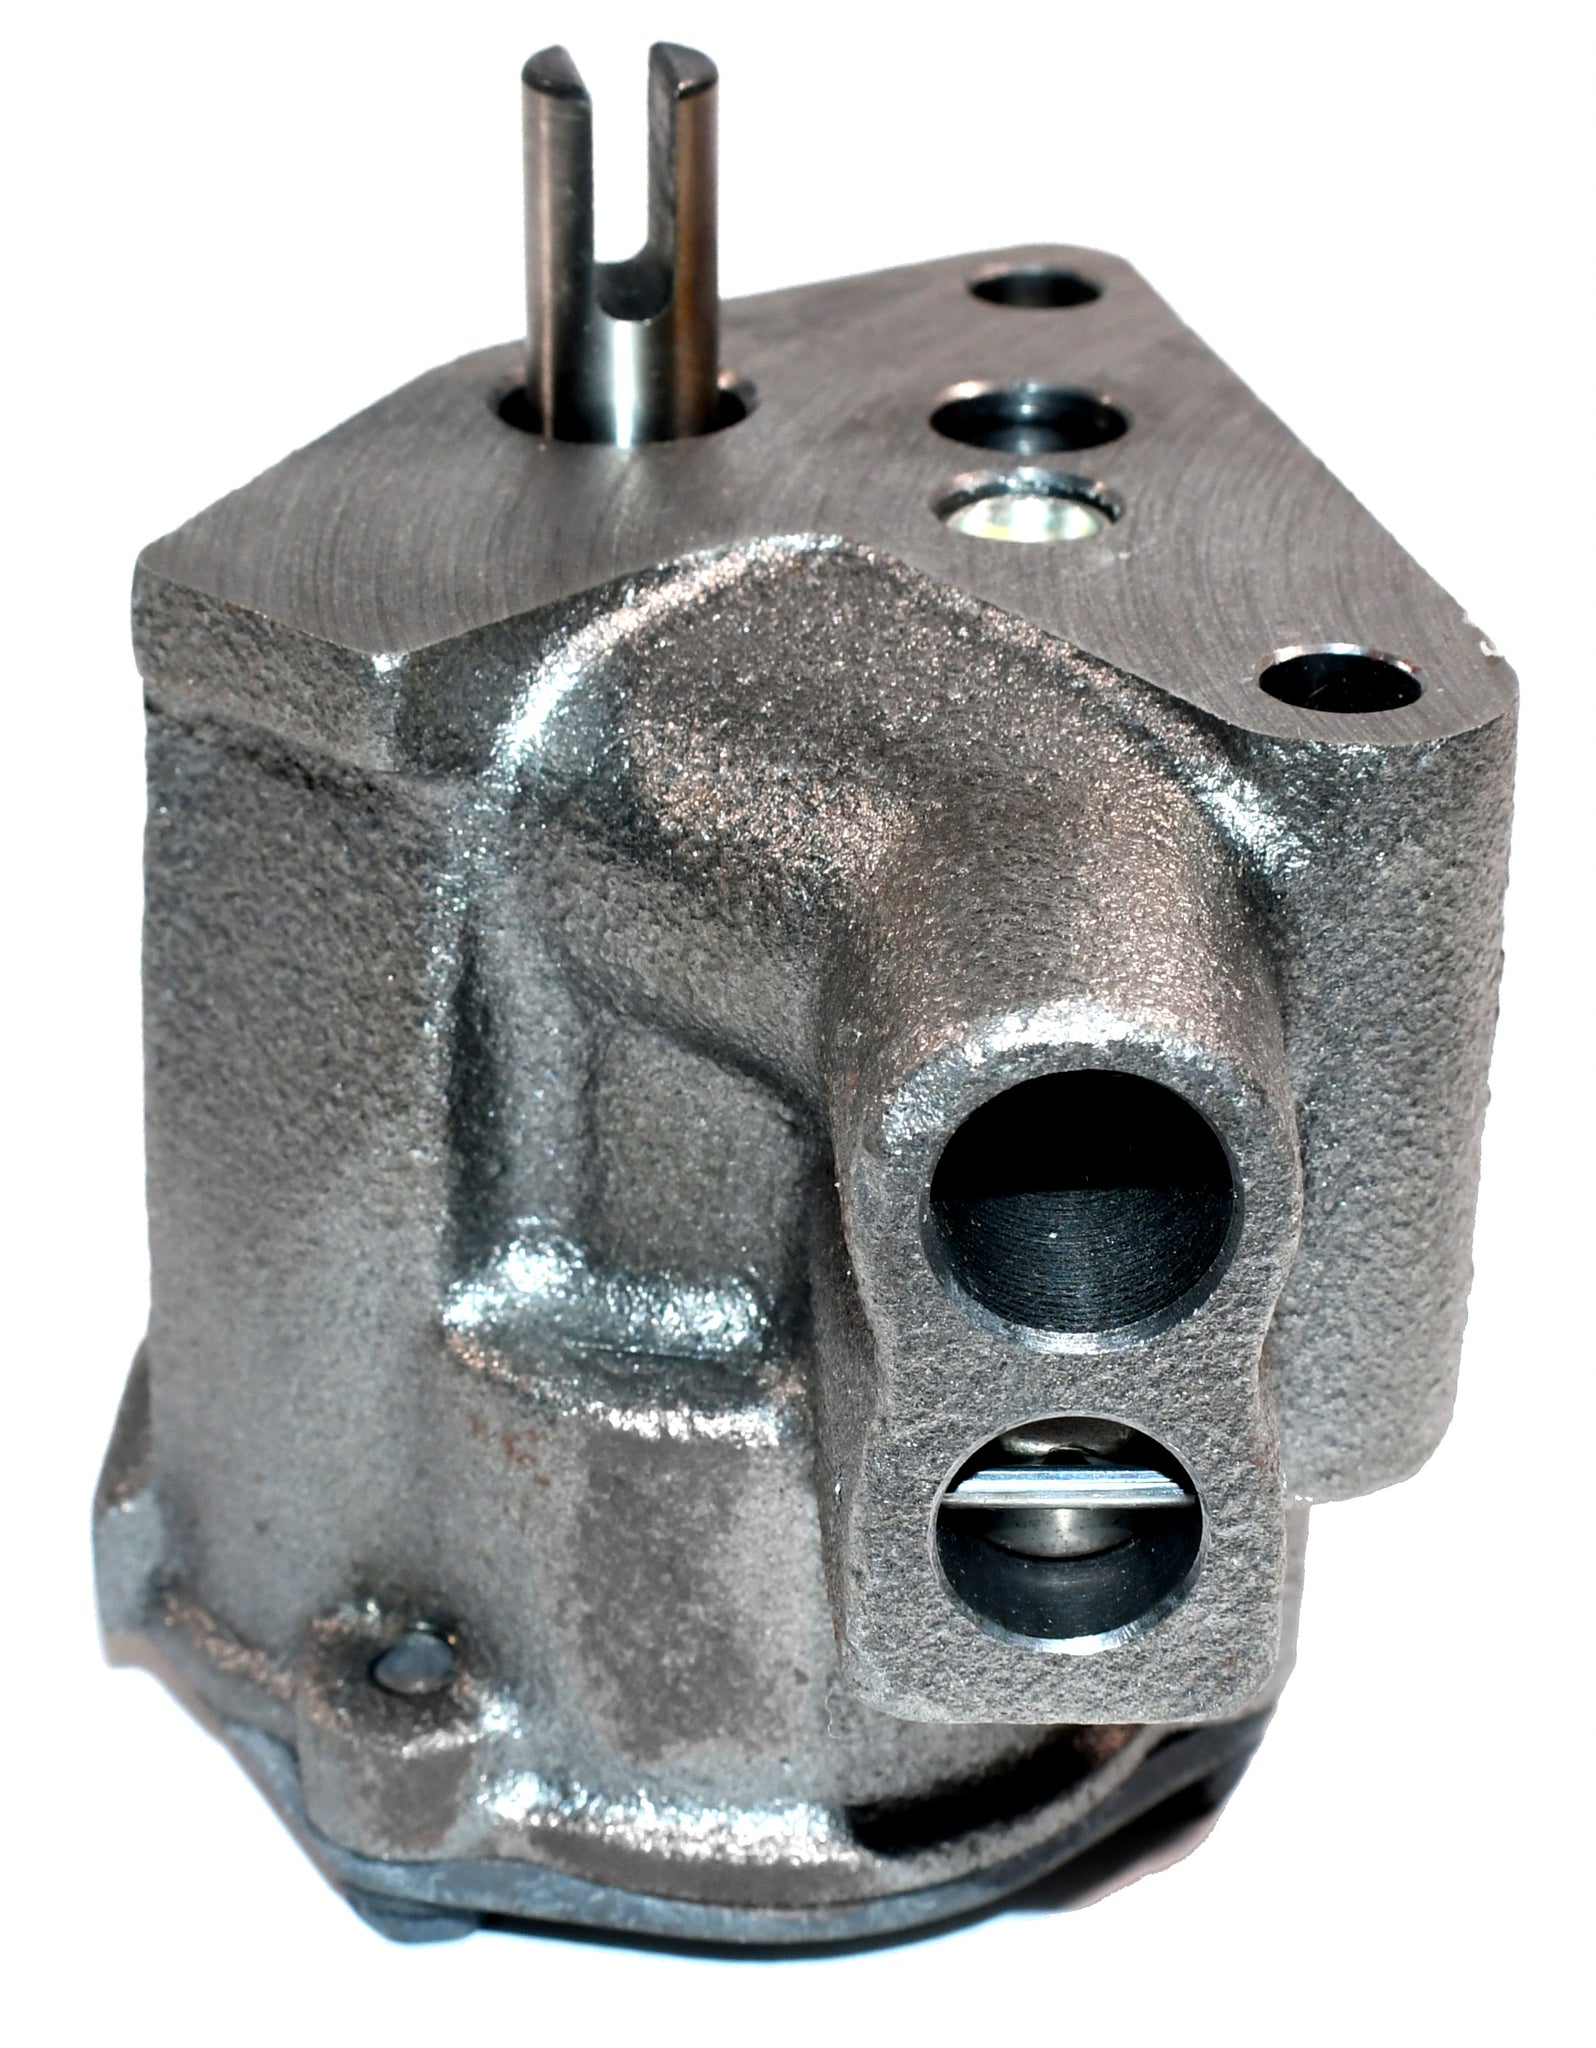 New oil pump for select 1964-1982 AMC, Jeep, International Harvester, IH vehicles w/ 3.8L, 4.2L or 5.3L engine from  Sealed Power 224-41199